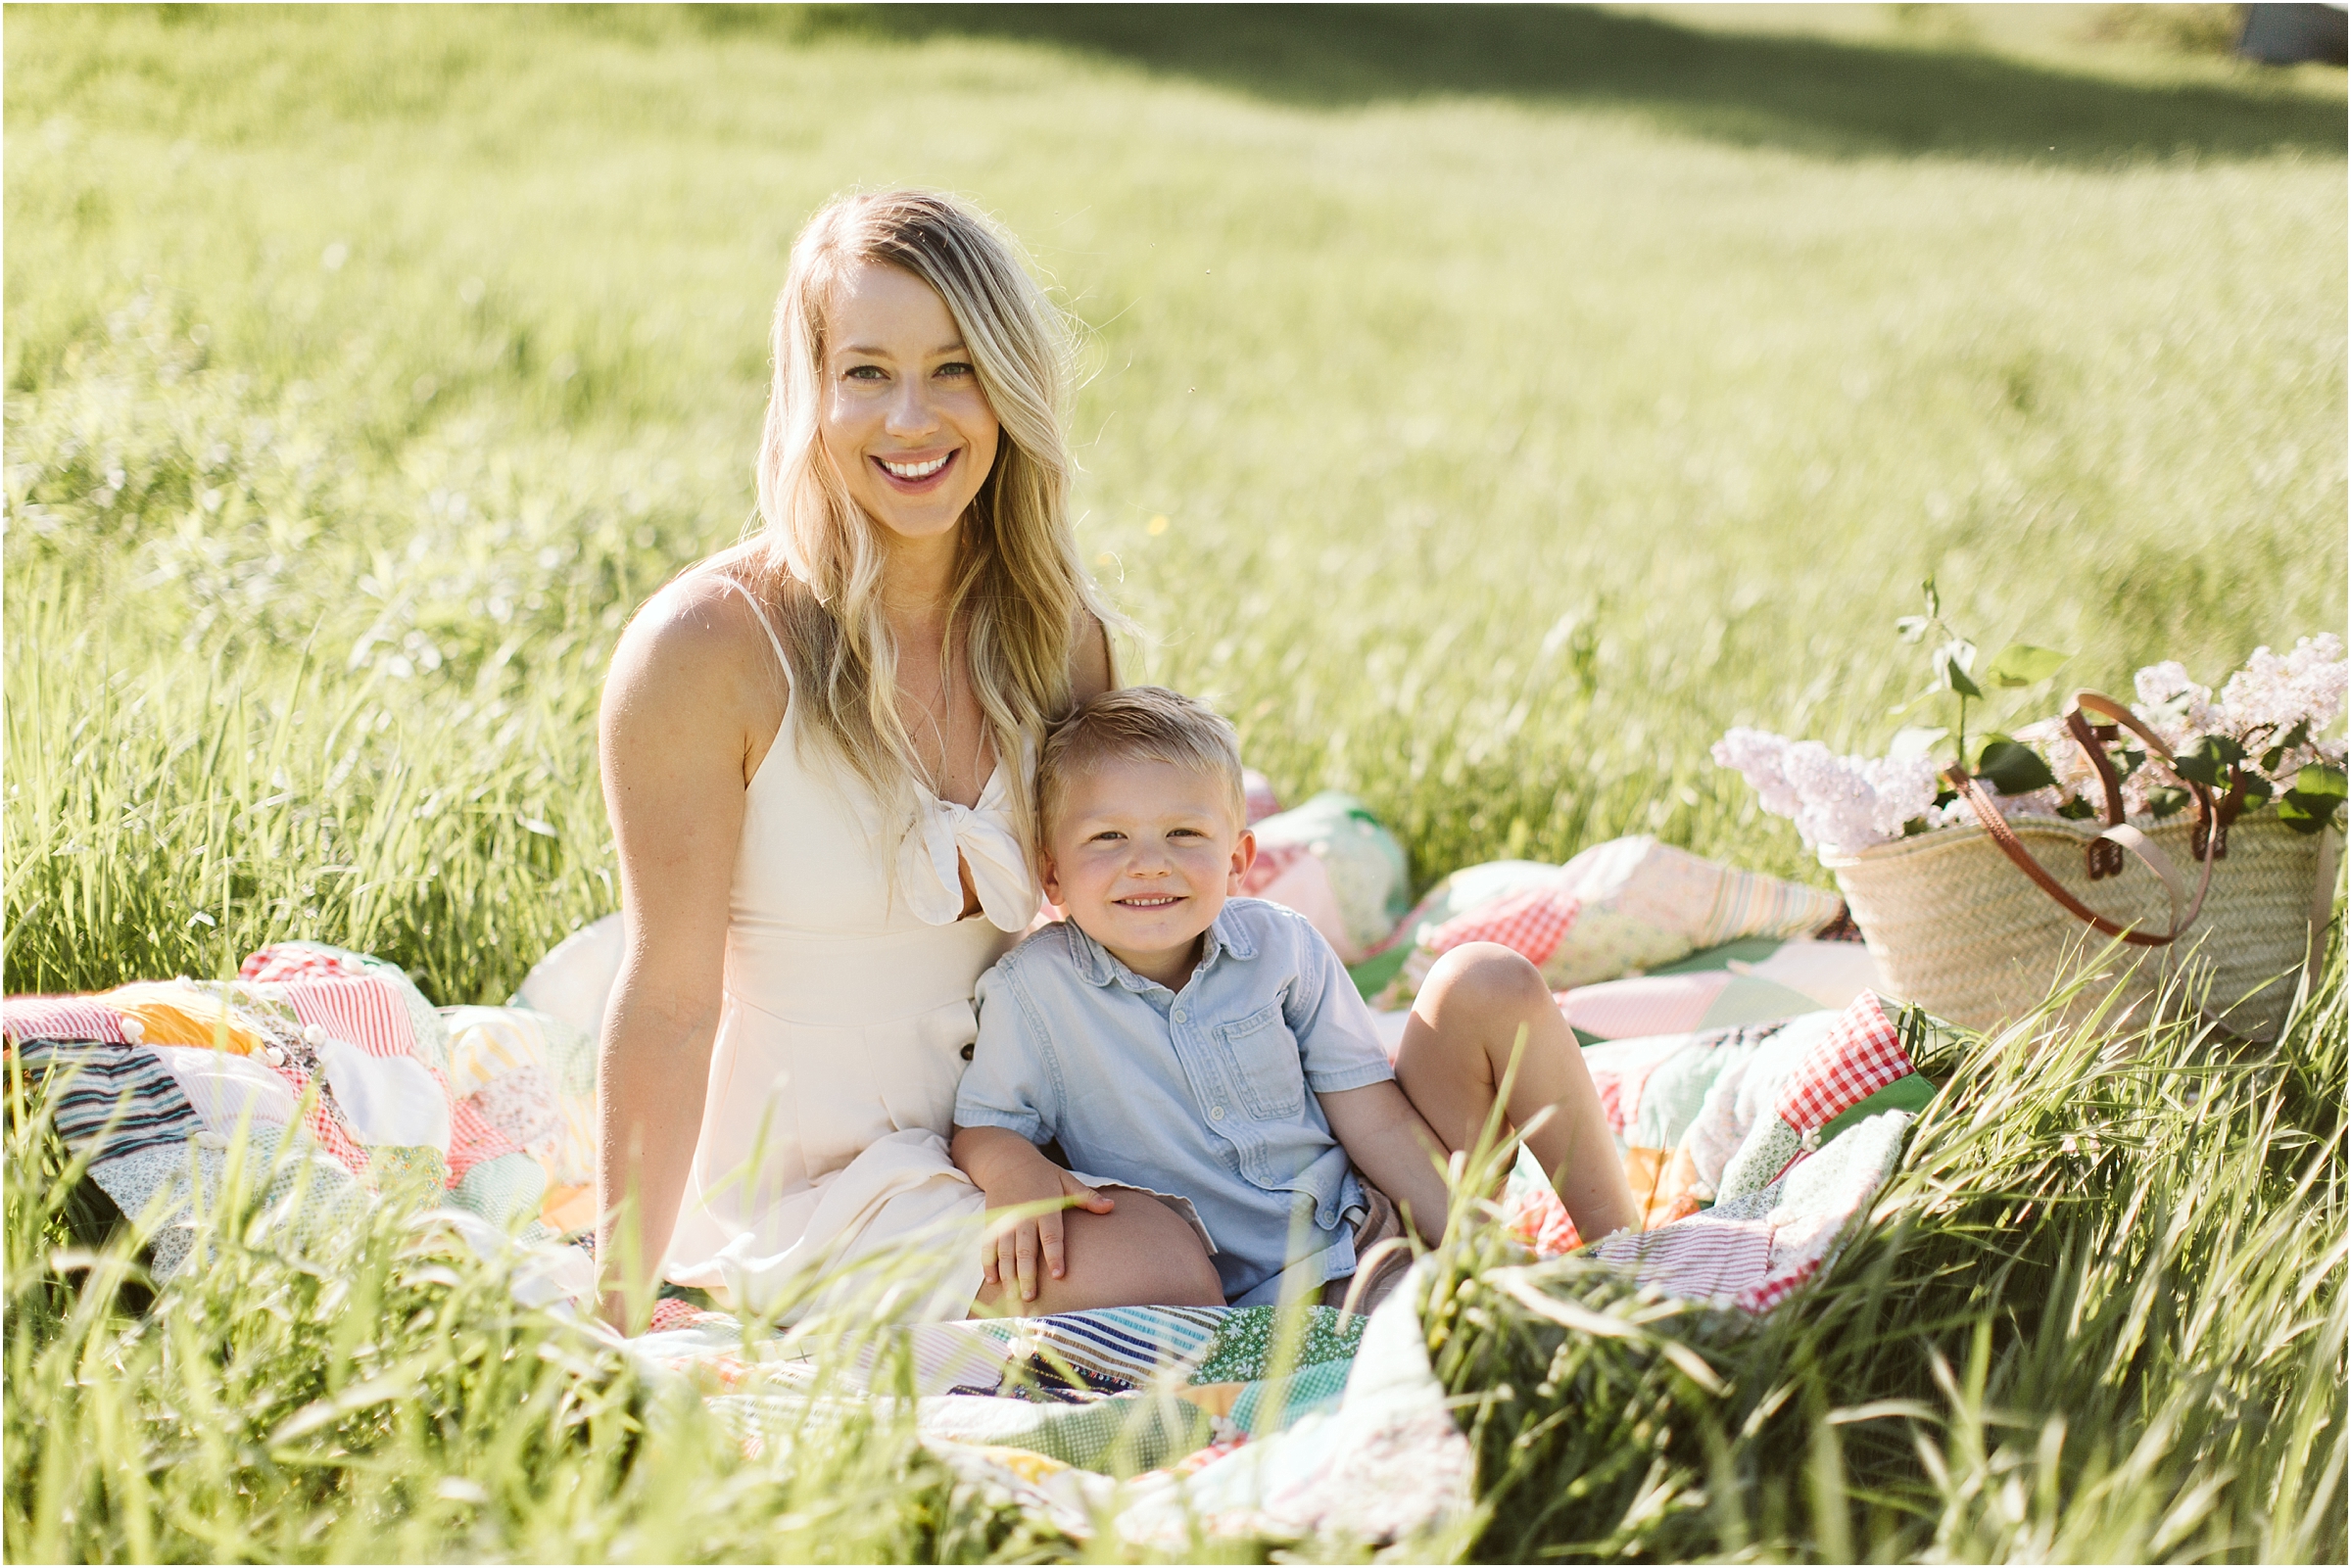 spring, lifestyle, family, mommy and me, portrait, family, wisconsin, stevens point, wausau, photography, photographer, spring, lilac, natural light